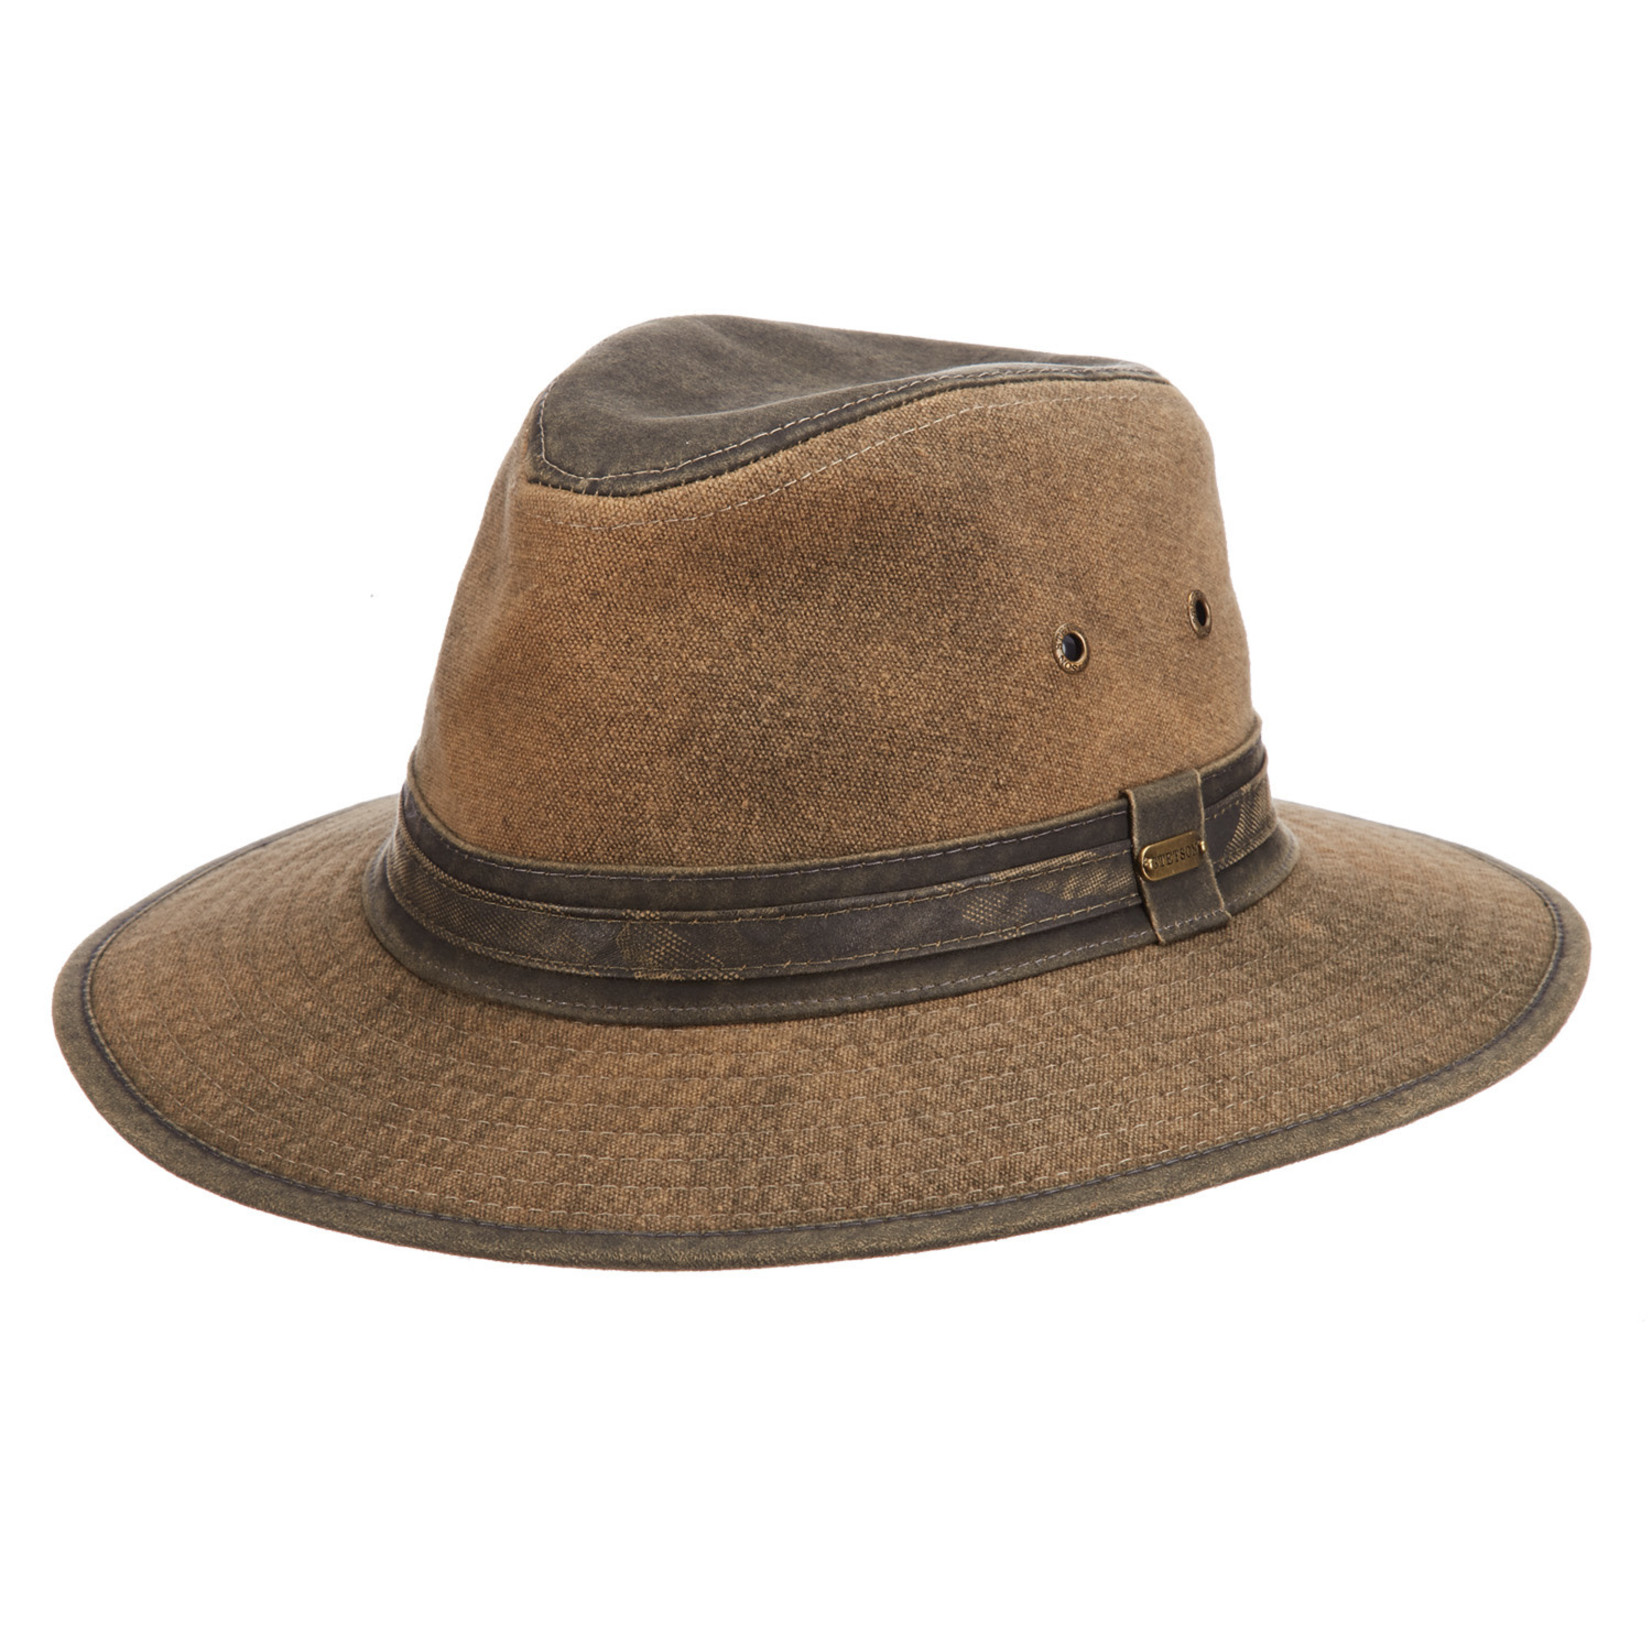 Stetson Hats - Longtrail Traveler - Brown - STW320 - Ford and McIntyre ...